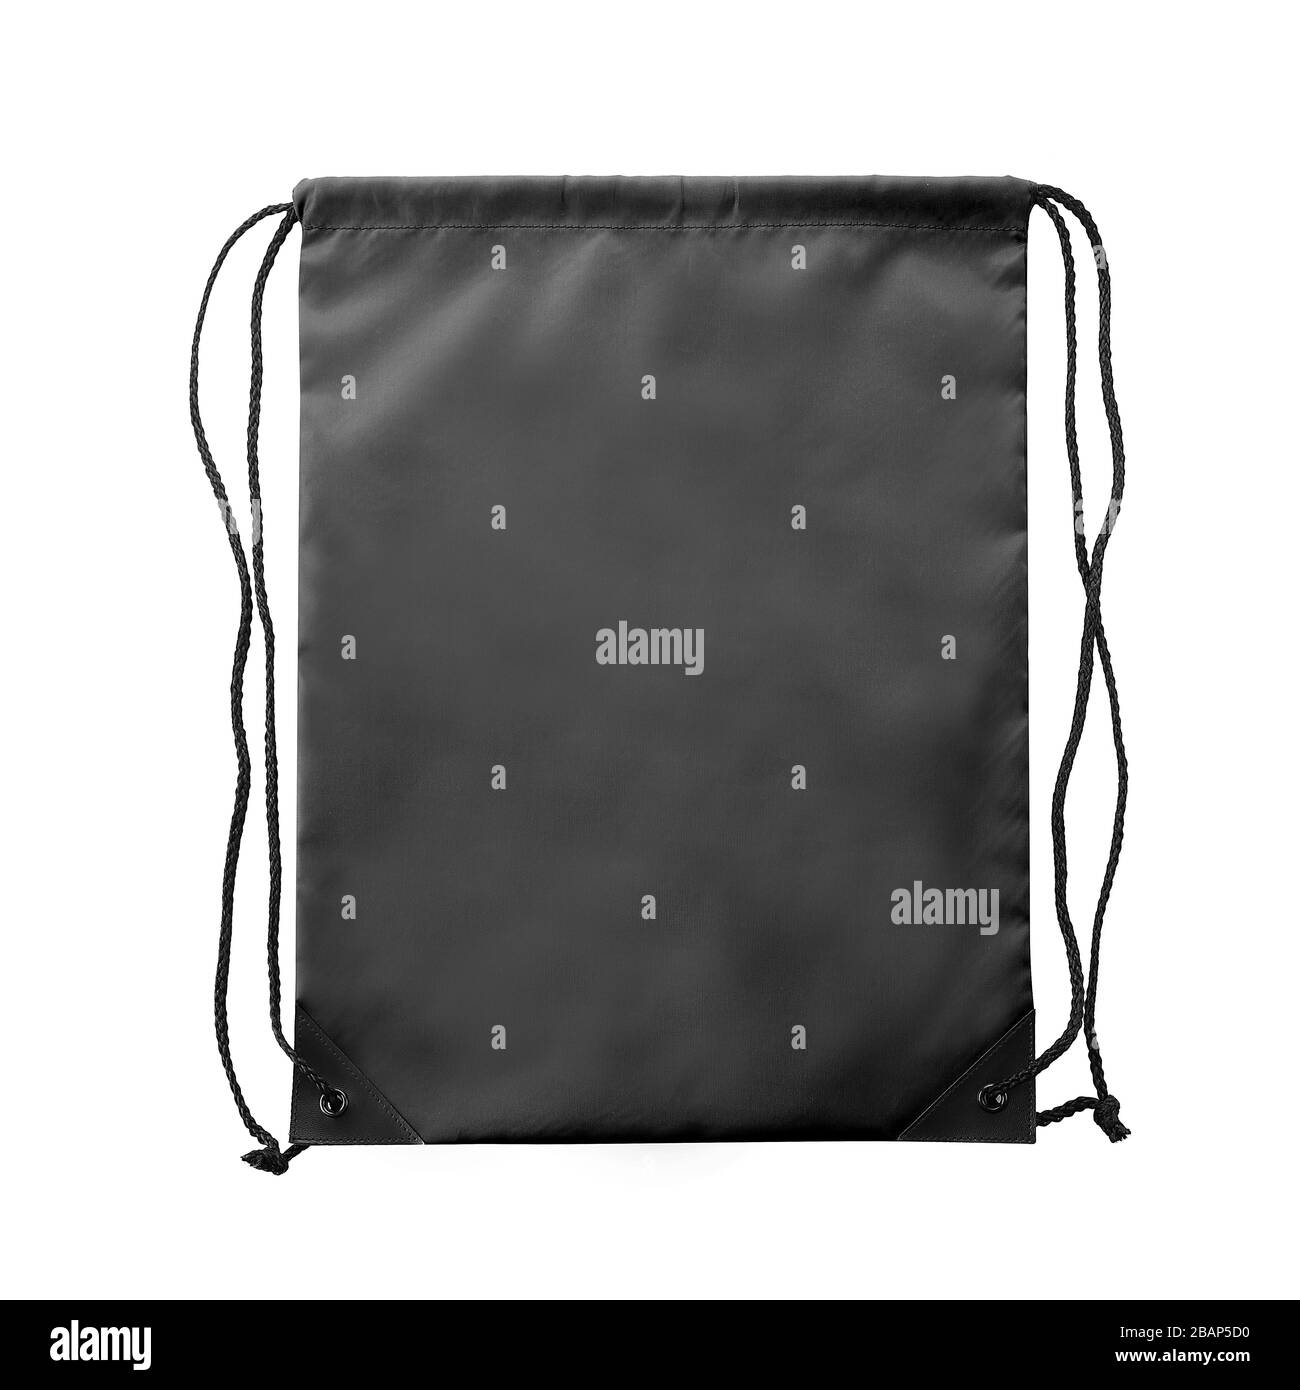 Black drawstring bag with string at both side. polyester material. For mock up, advertising & e-commerce. Studio shot isolated in white background Stock Photo